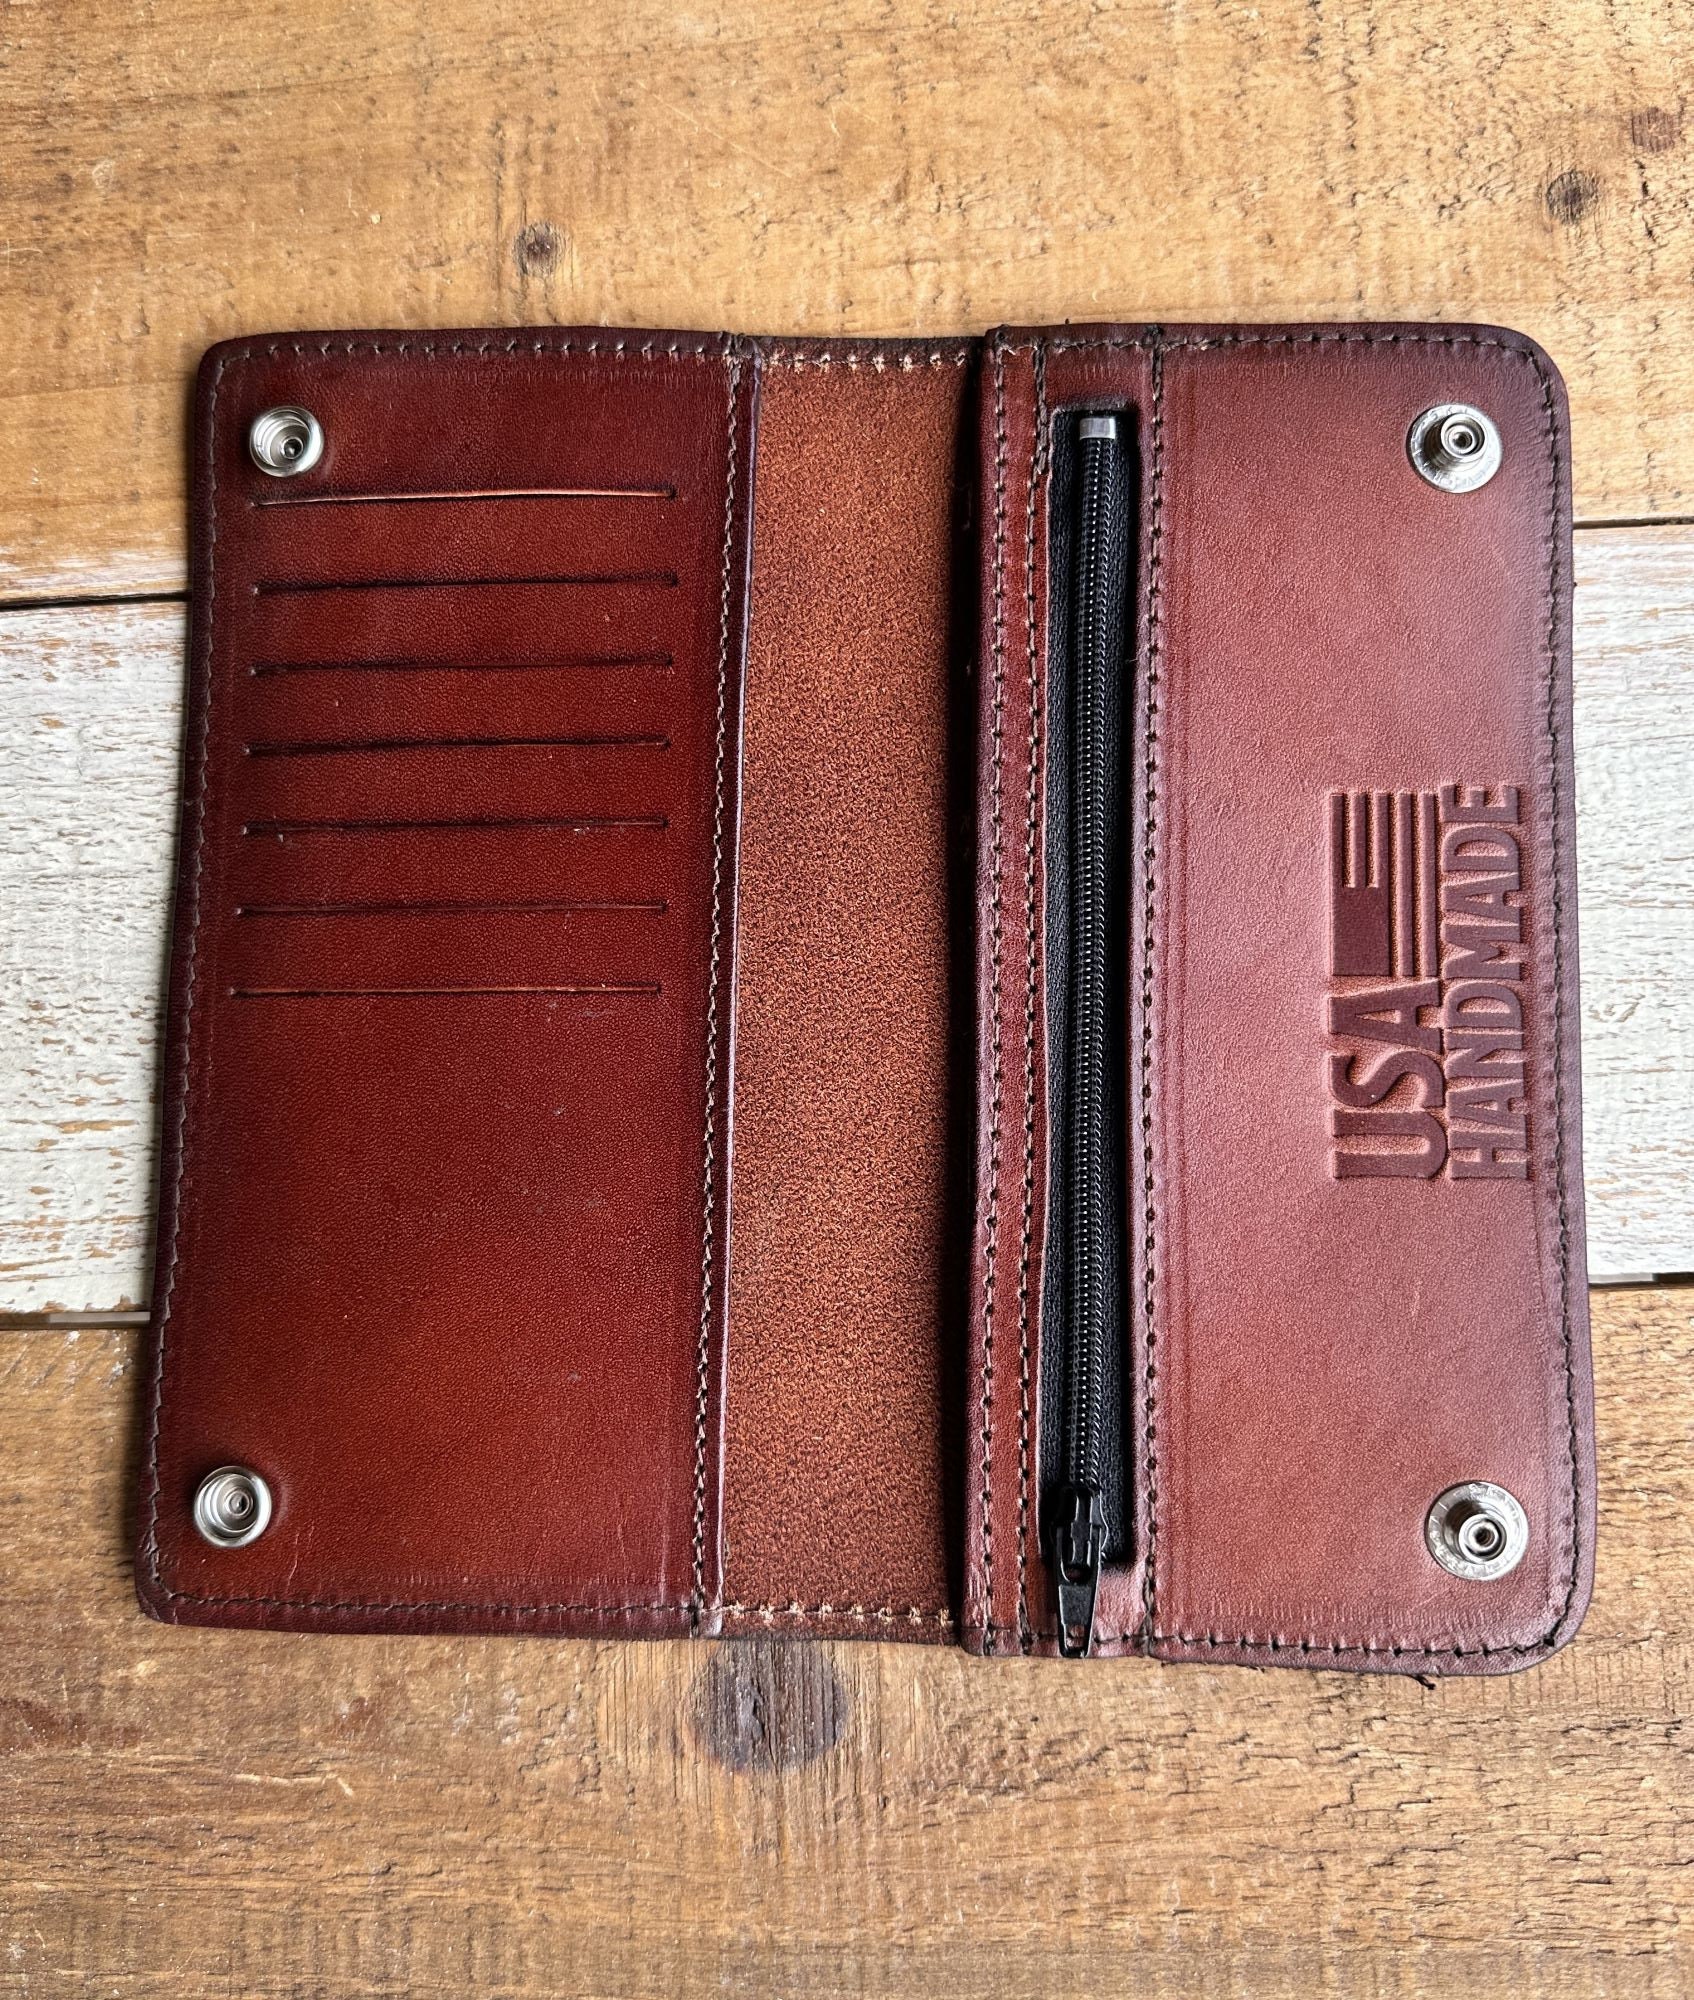 Personalized Bass Fisherman Wallet, Custom Engraved Long Leather Wallet, Hand Made in The USA, Long Wallet with Snaps, Antique Finish